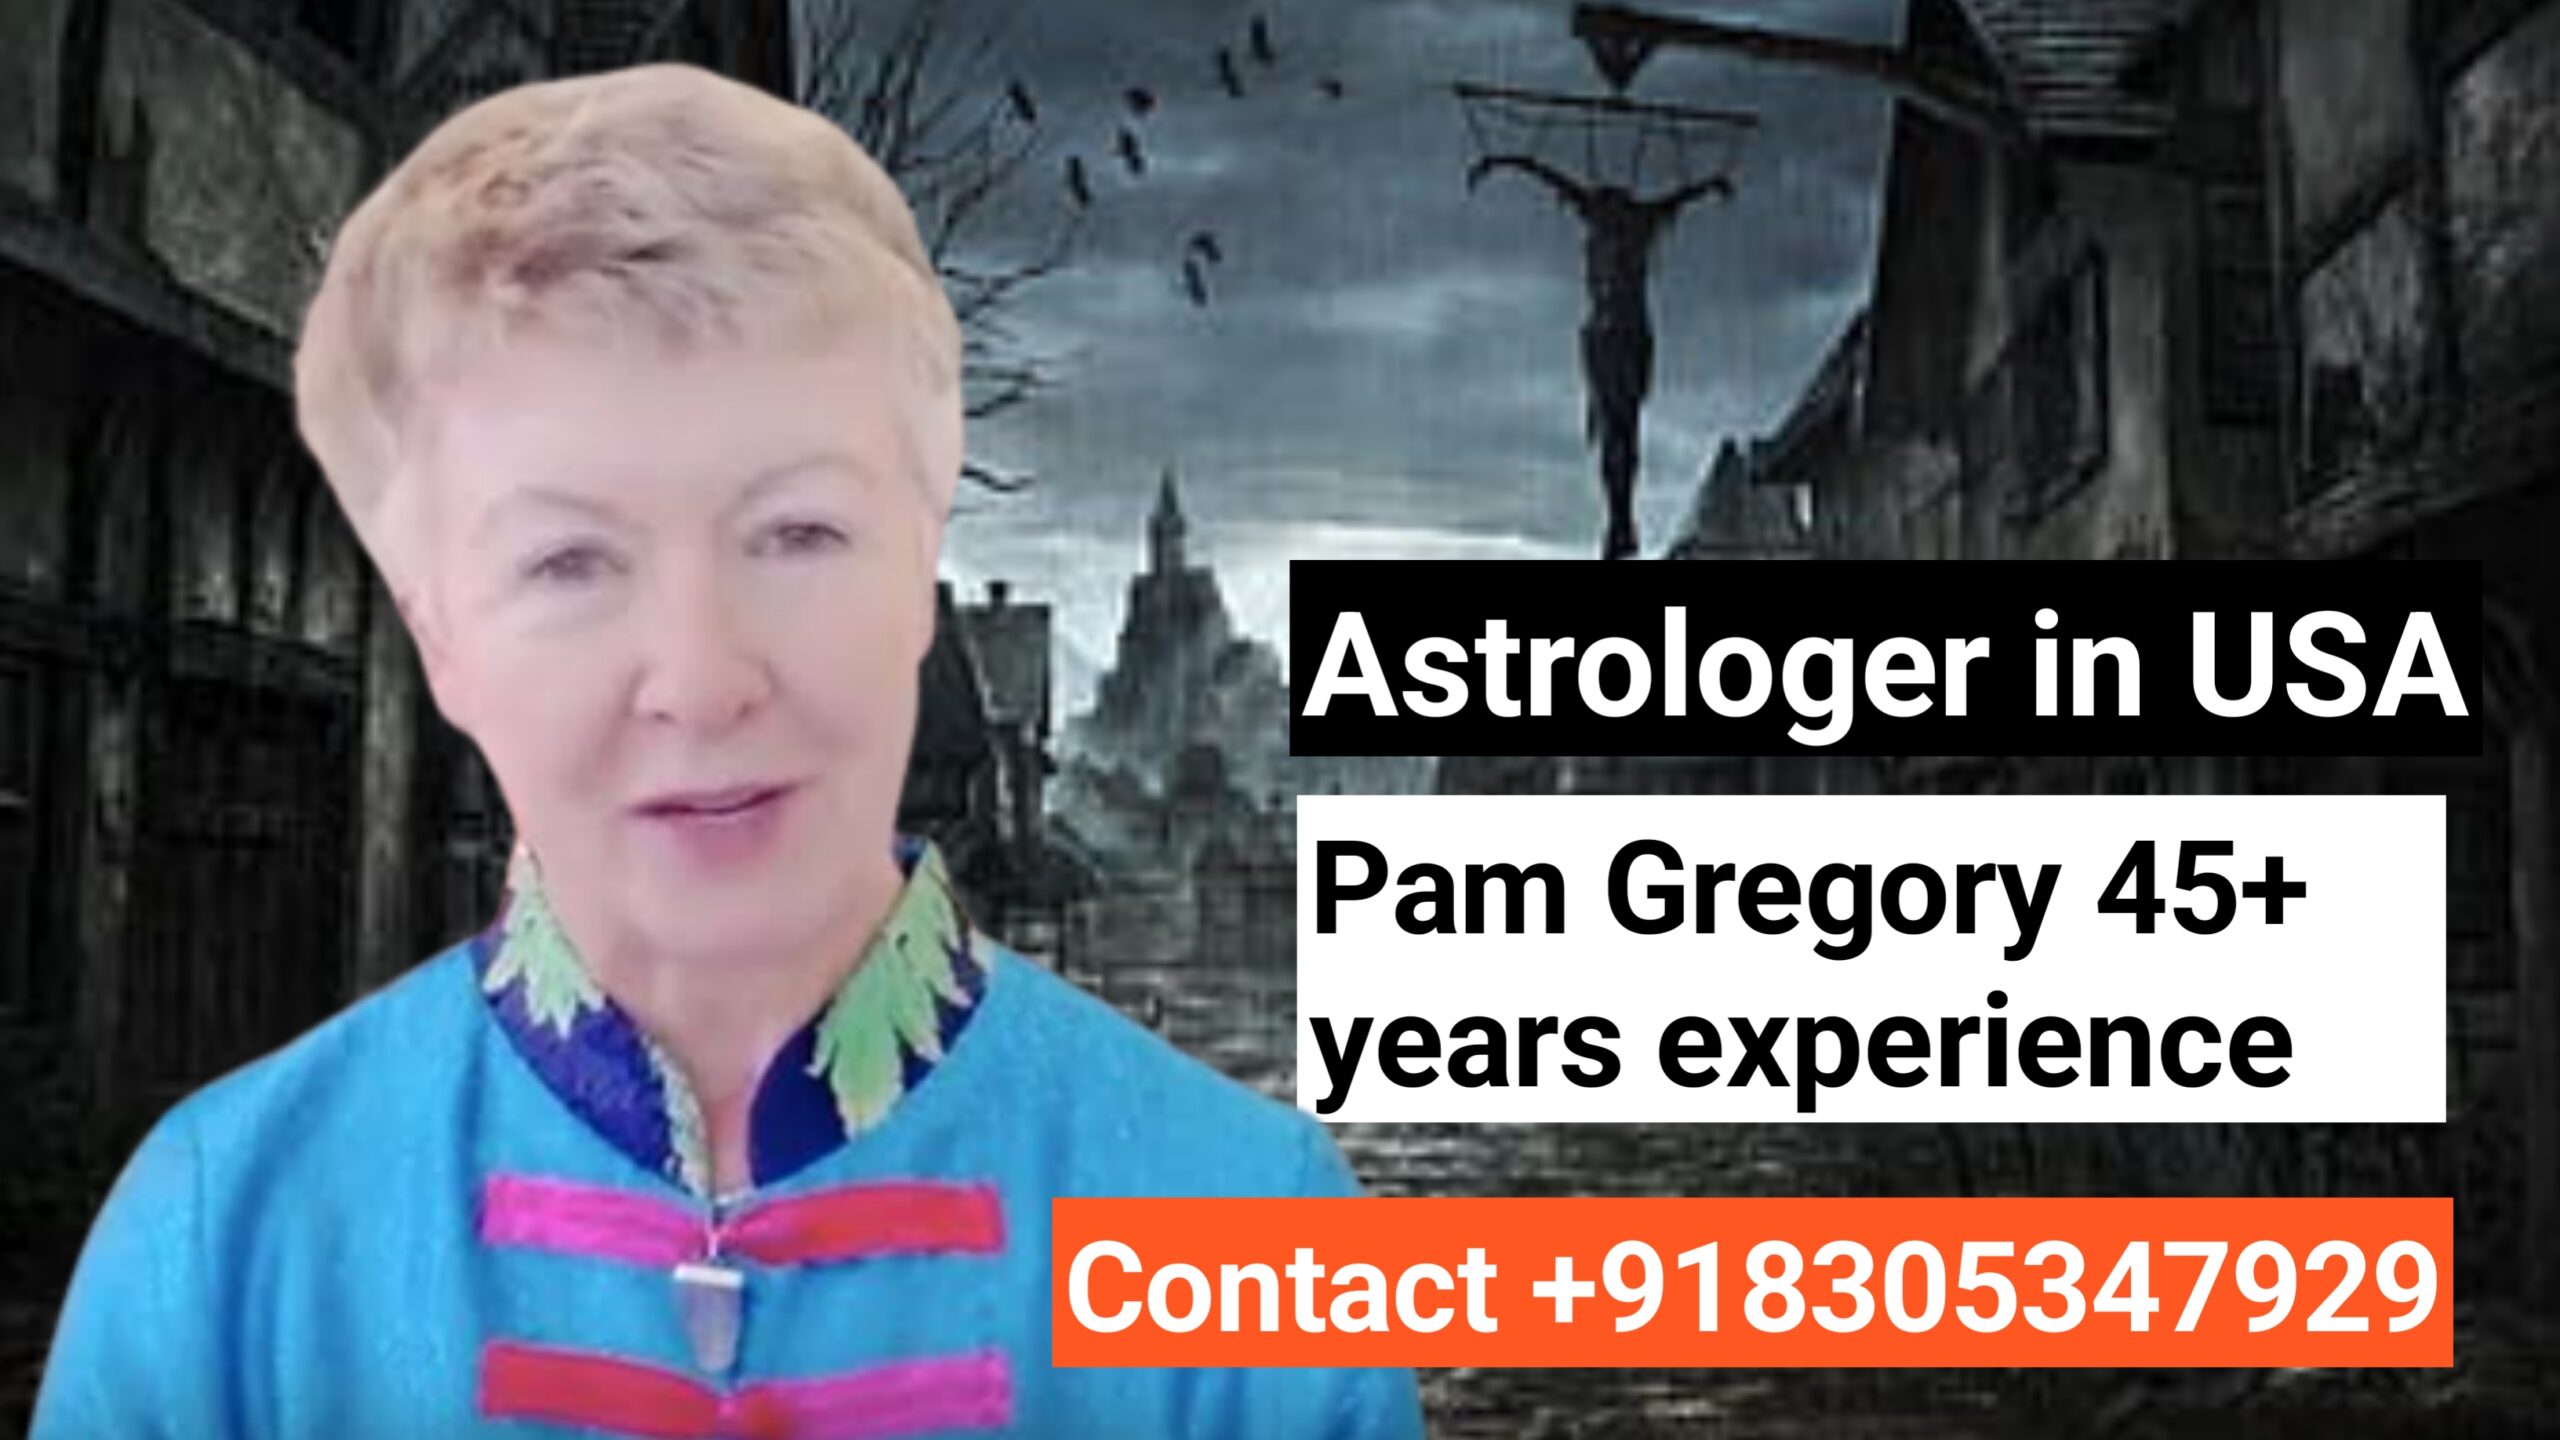 Pam Gregory Image